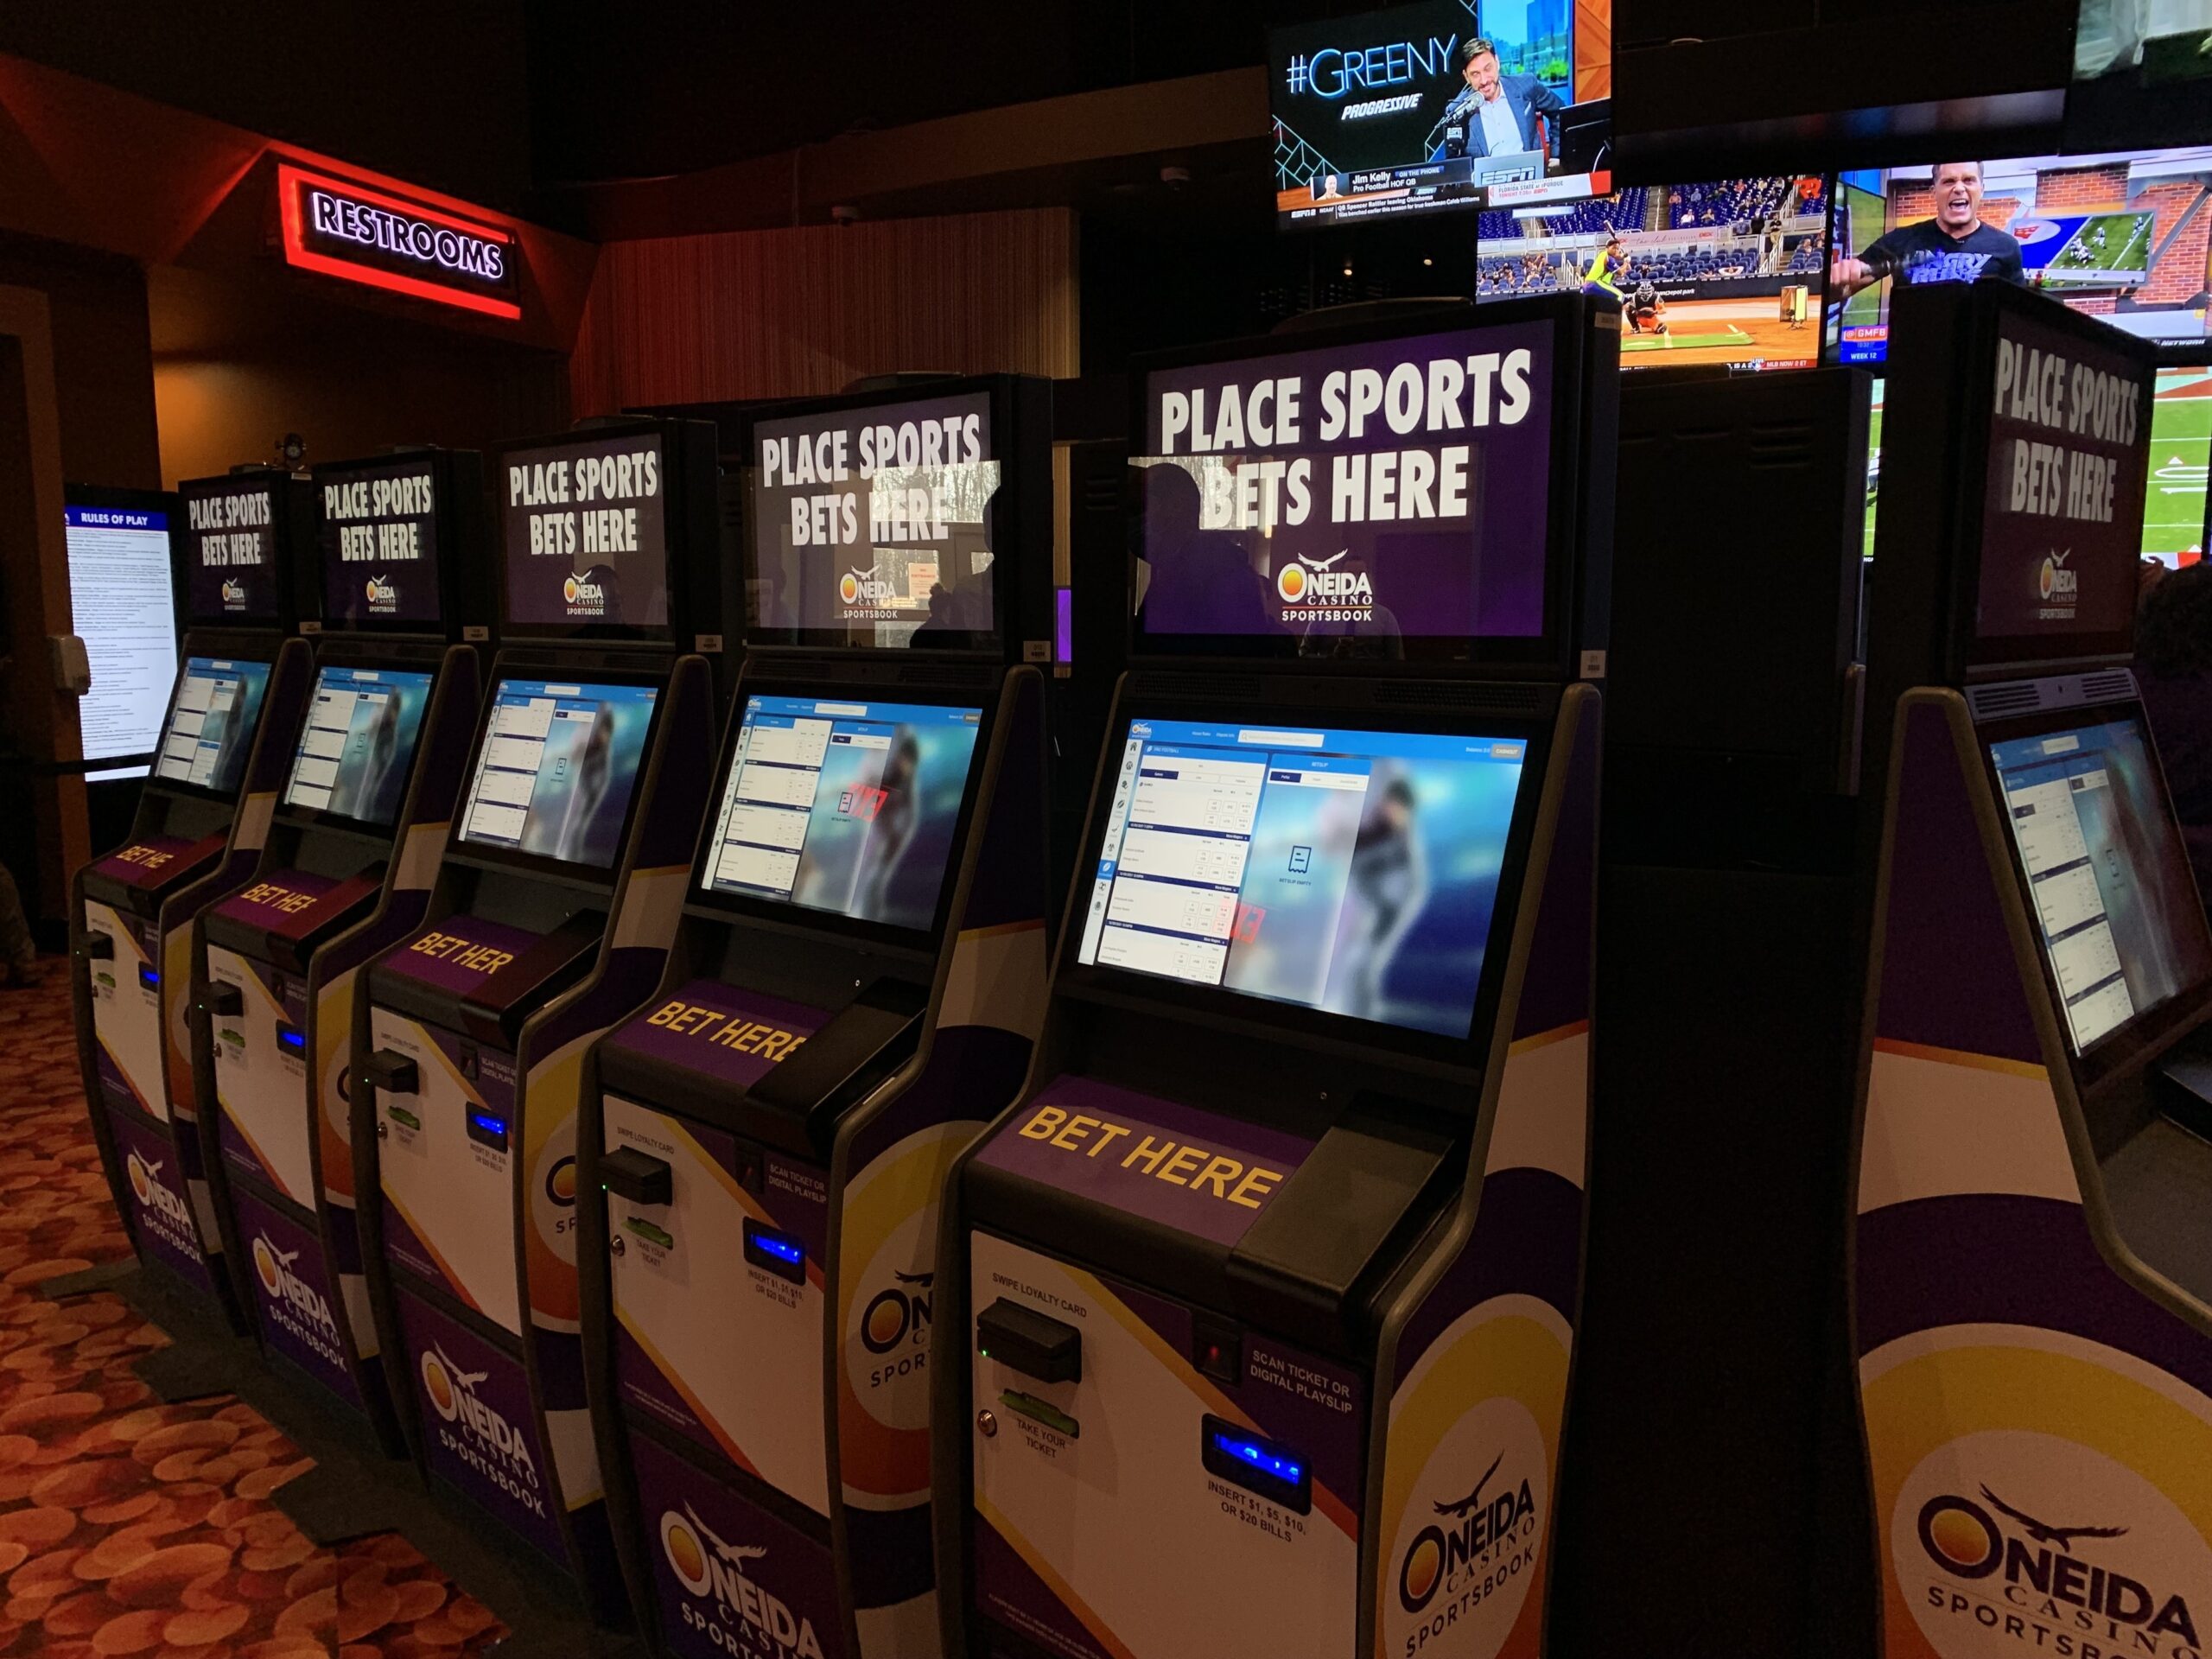 More tribes in Wisconsin might soon offer sports gambling, Oneida Casino official bets